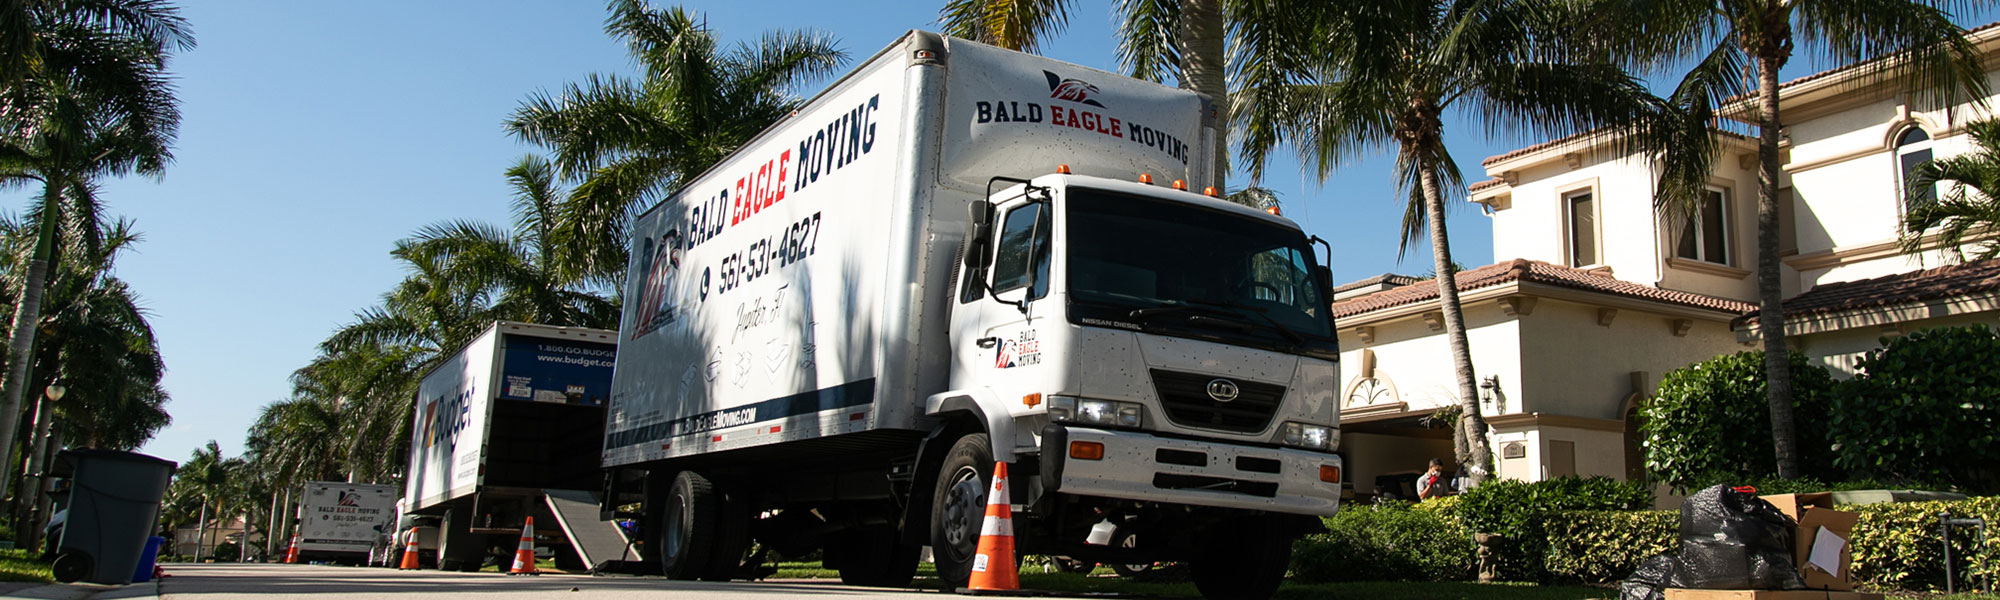 long distance movers from south florida bald eagle moving company